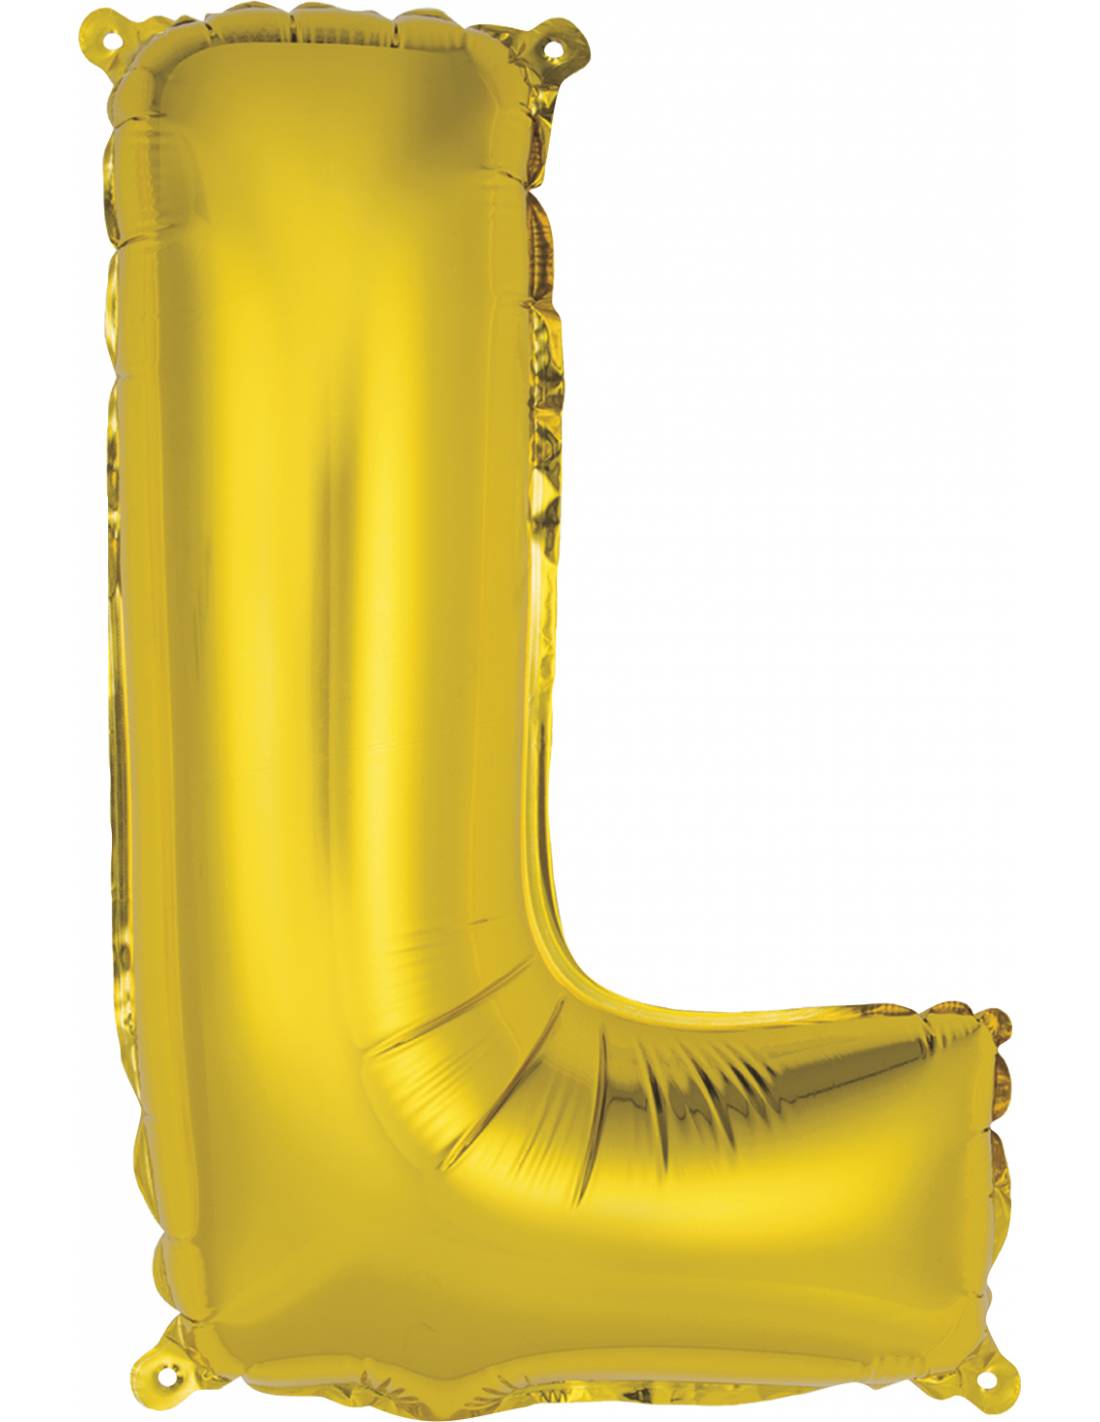 Gold Letter L Shaped Foil Balloon 14 Inch